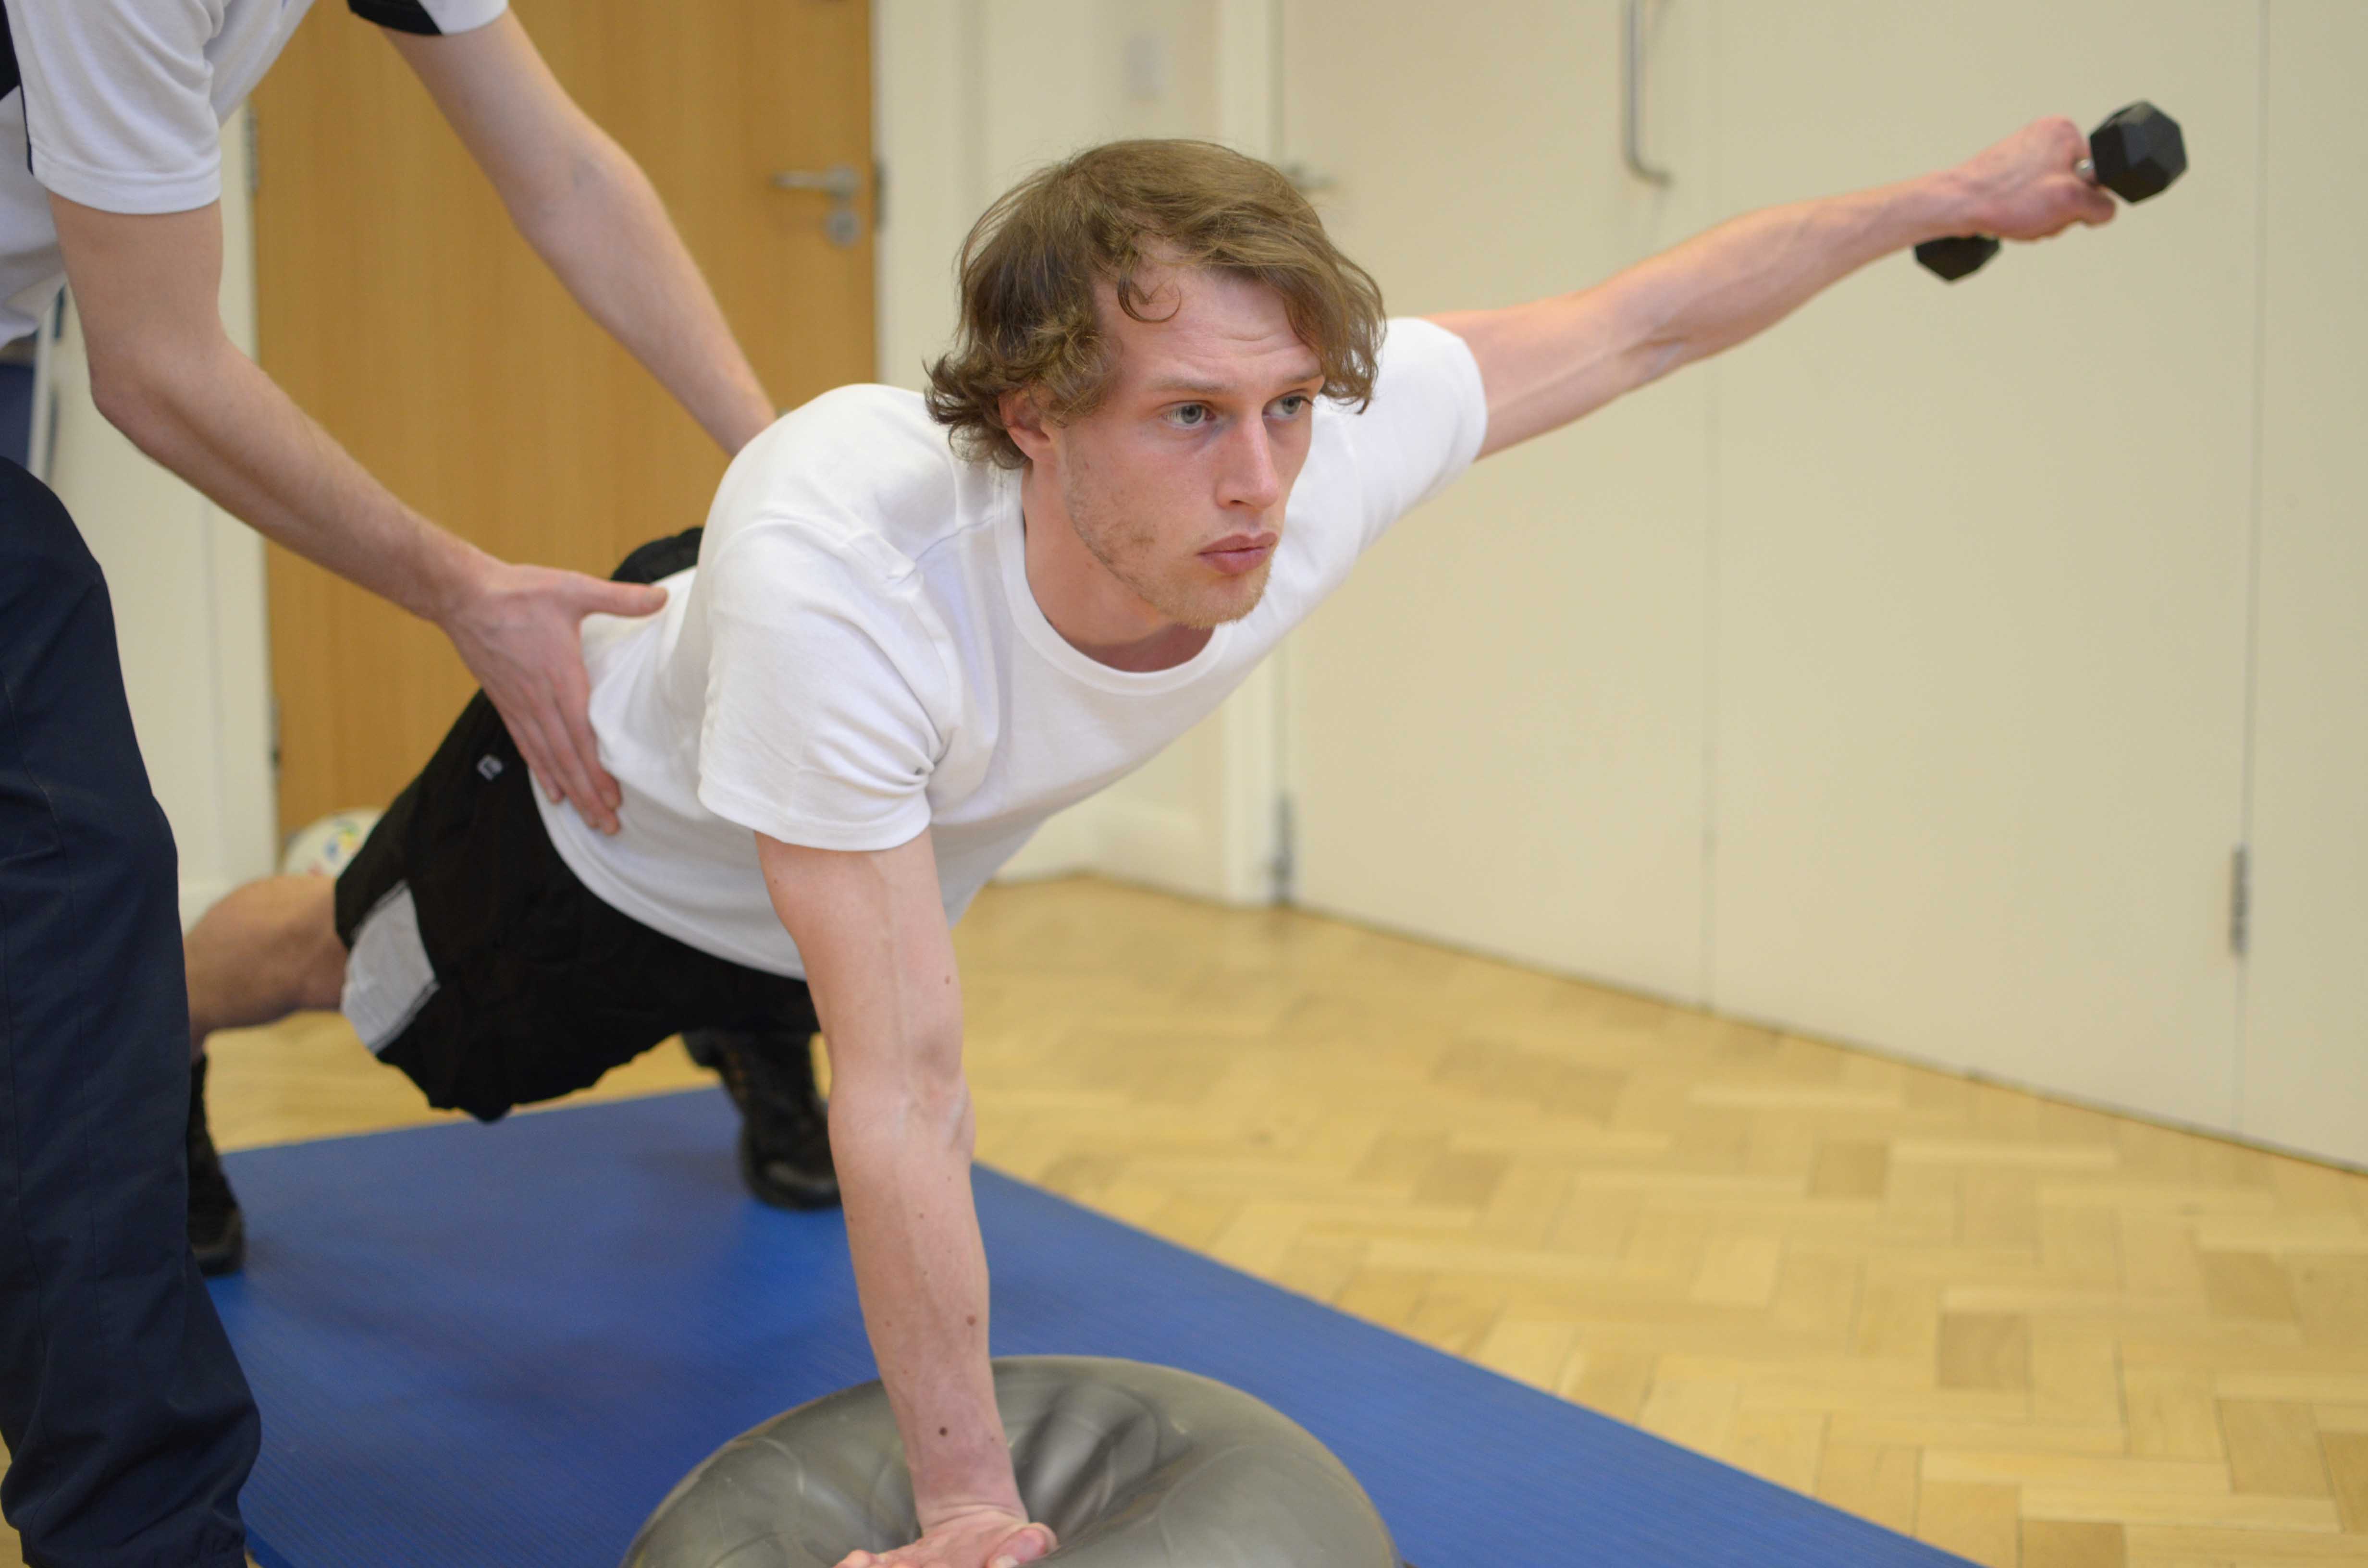 Dynamic balance and co-ordination exercises assisted by an experienced Physiotherapist